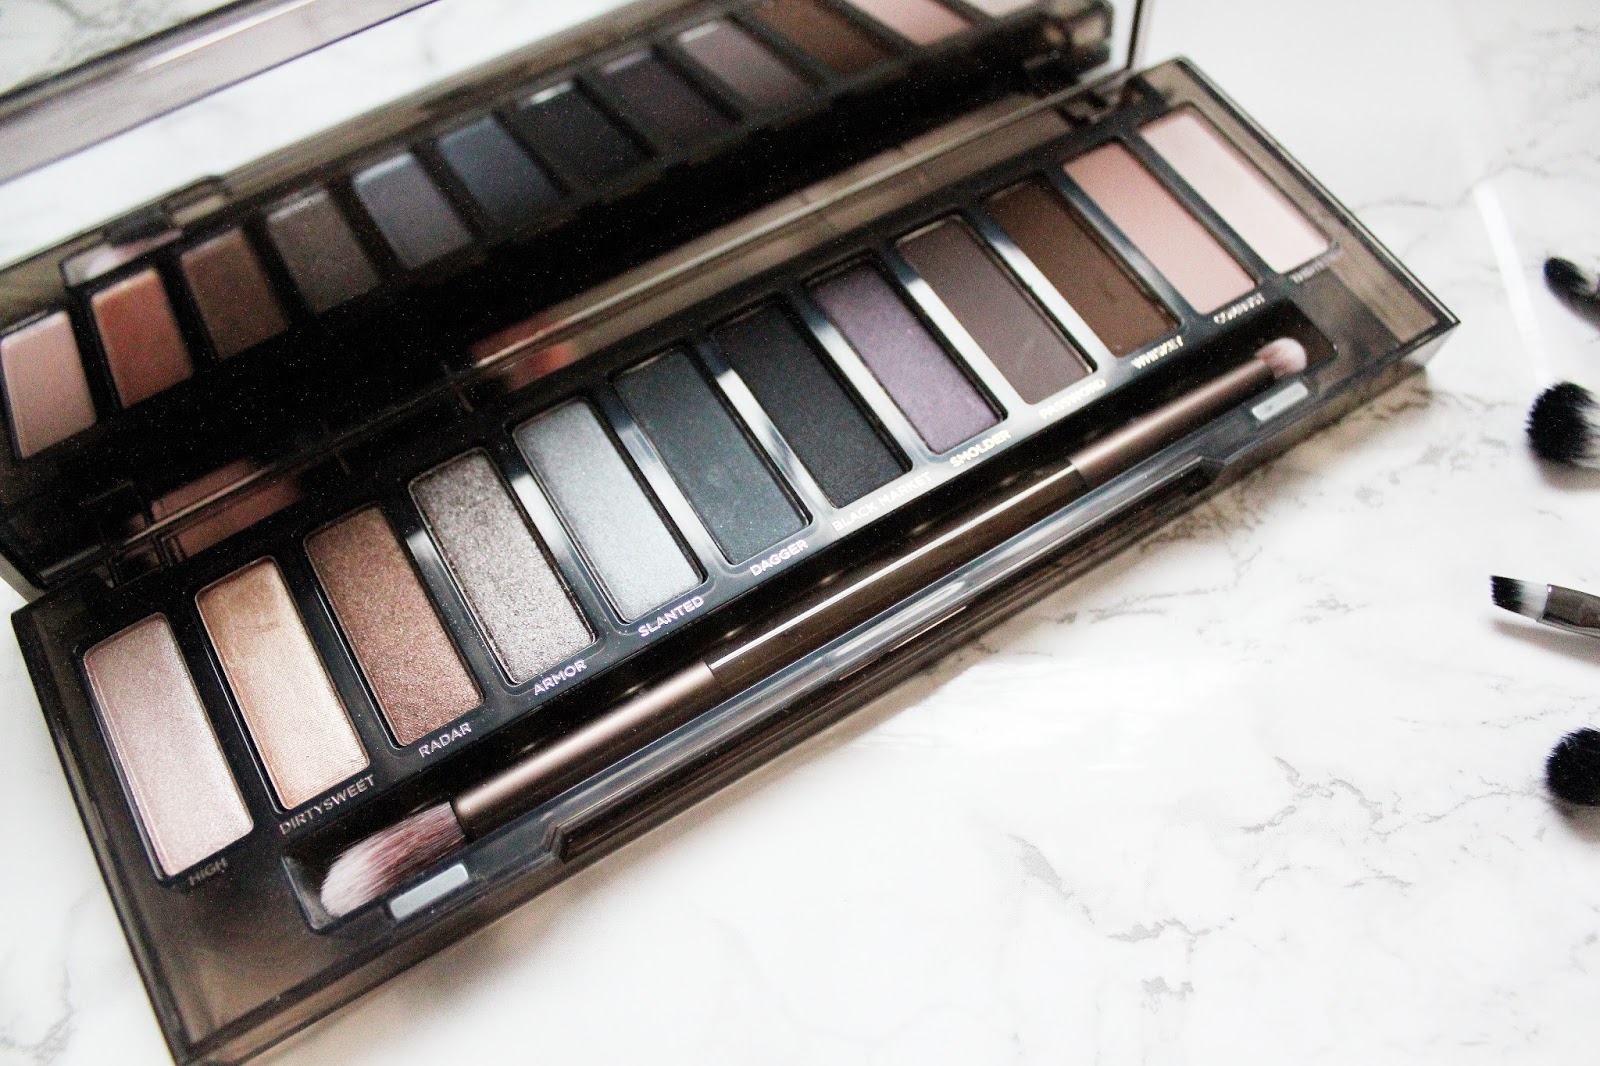 Urban Decay Naked Heat Palette Review + Swatches - Reviews 